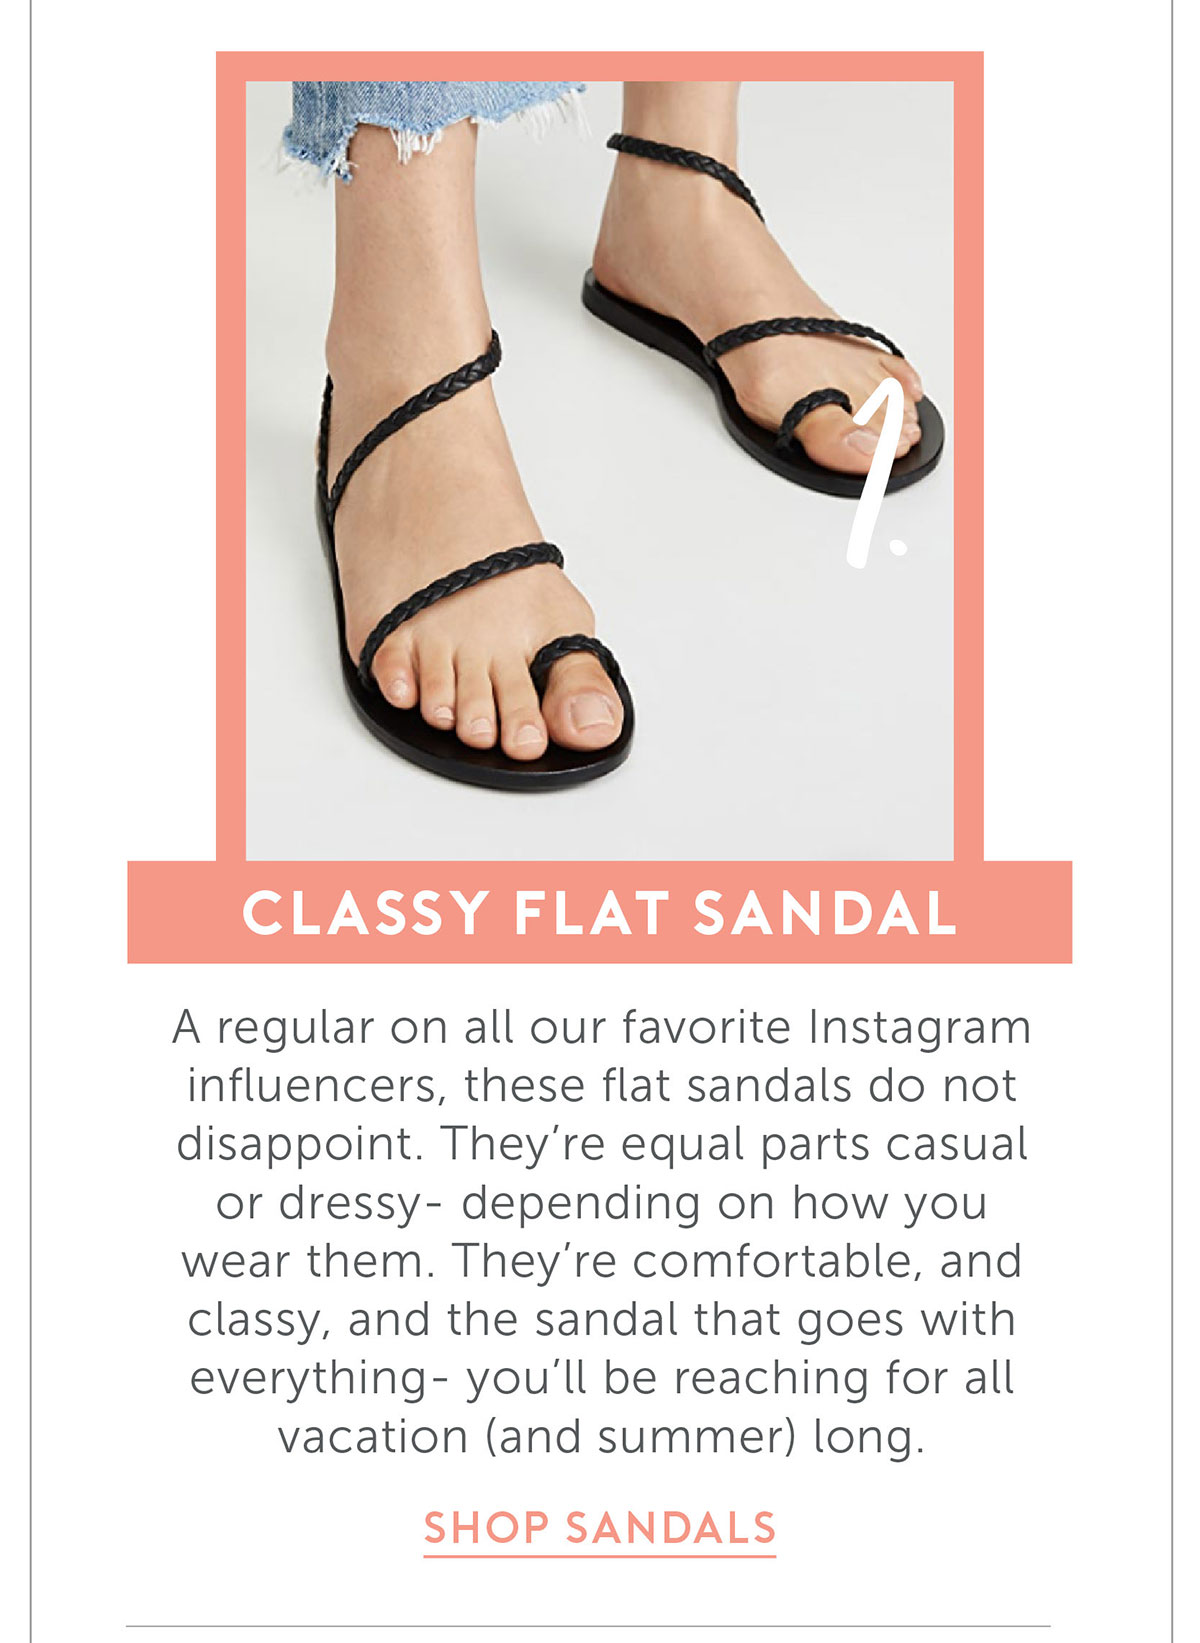 Classy Flat Sandal A regular on all our favorite Instagram influencers, these flat sandals do not disappoint. They’re equal parts casual or dressy- depending on how you wear them. They’re comfortable, and classy, and the sandal that goes with everything- you’ll be reaching for all vacation (and summer) long.